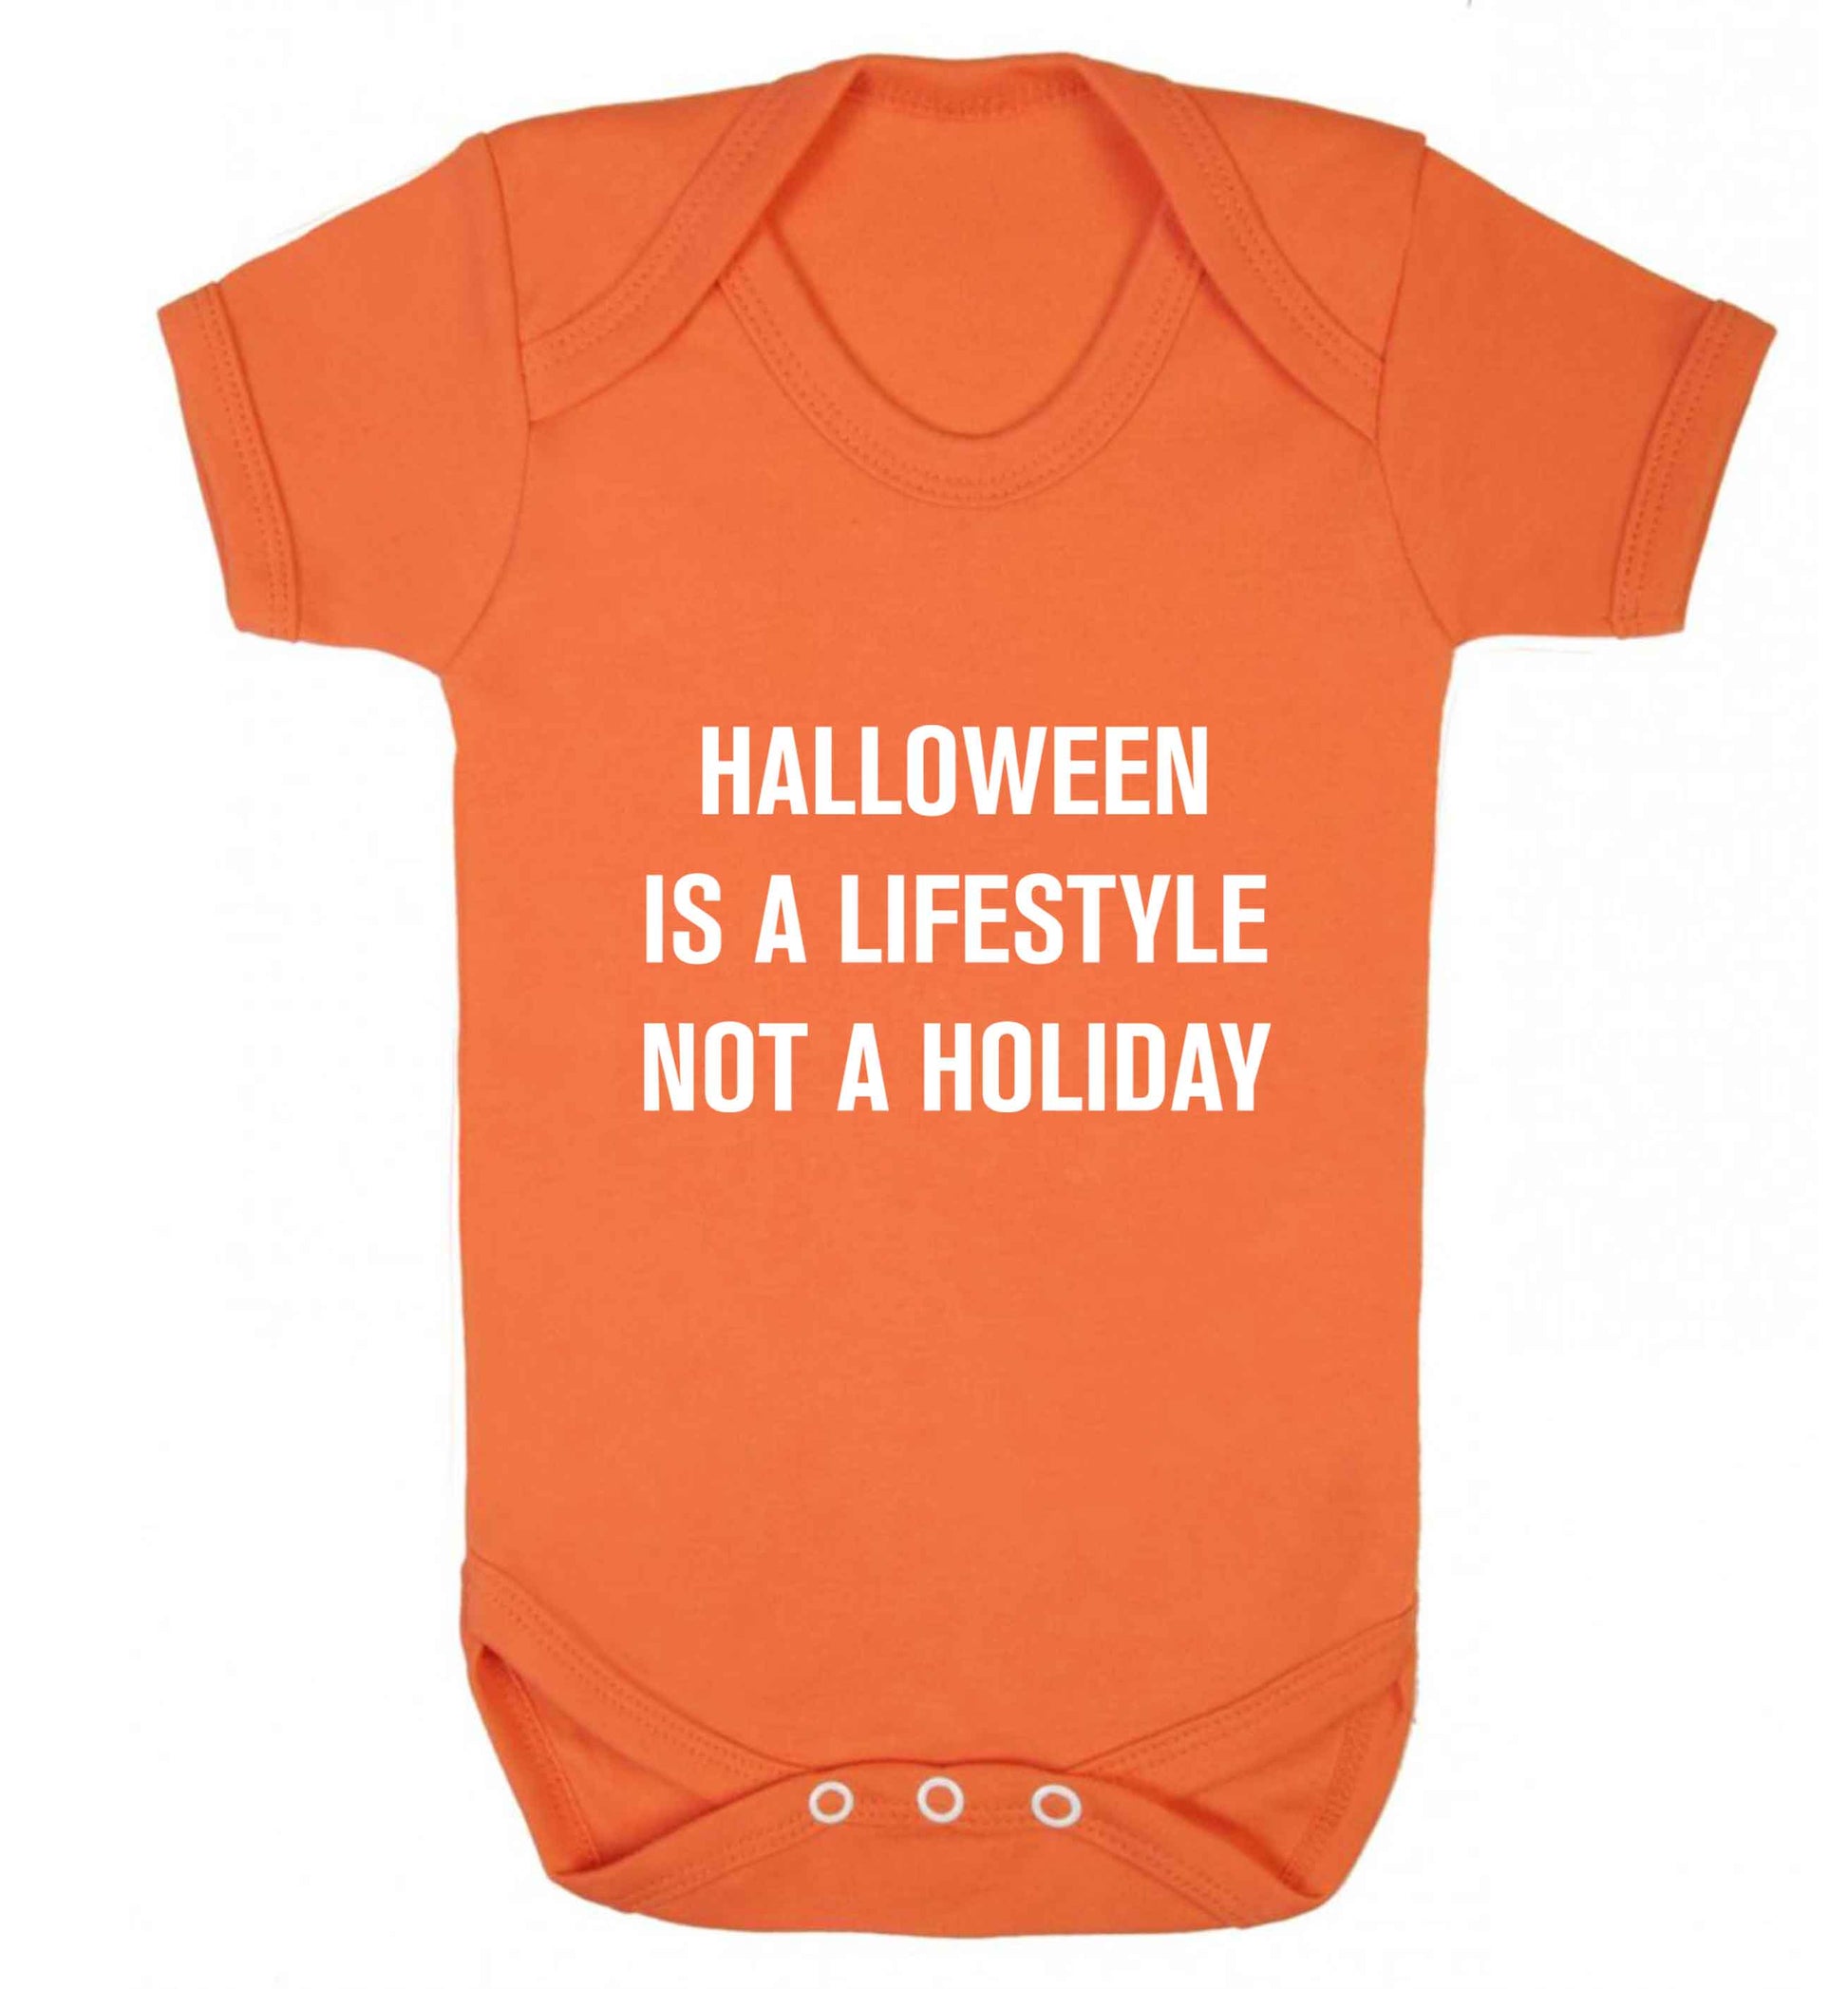 Halloween is a lifestyle not a holiday baby vest orange 18-24 months